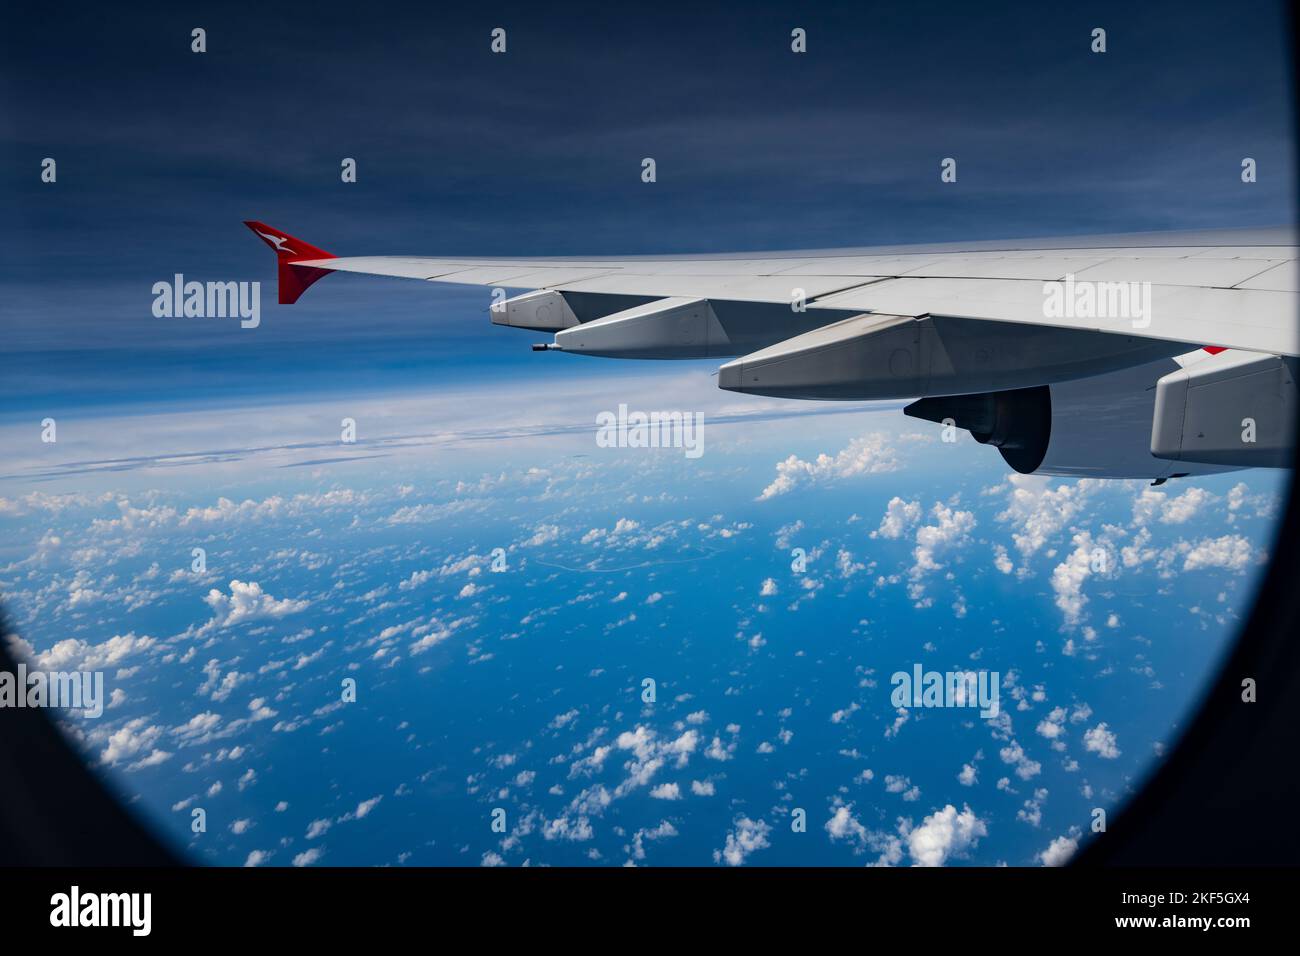 Wing of Australian Qantas airliner flying at 38,000 feet above Indian Ocean Stock Photo